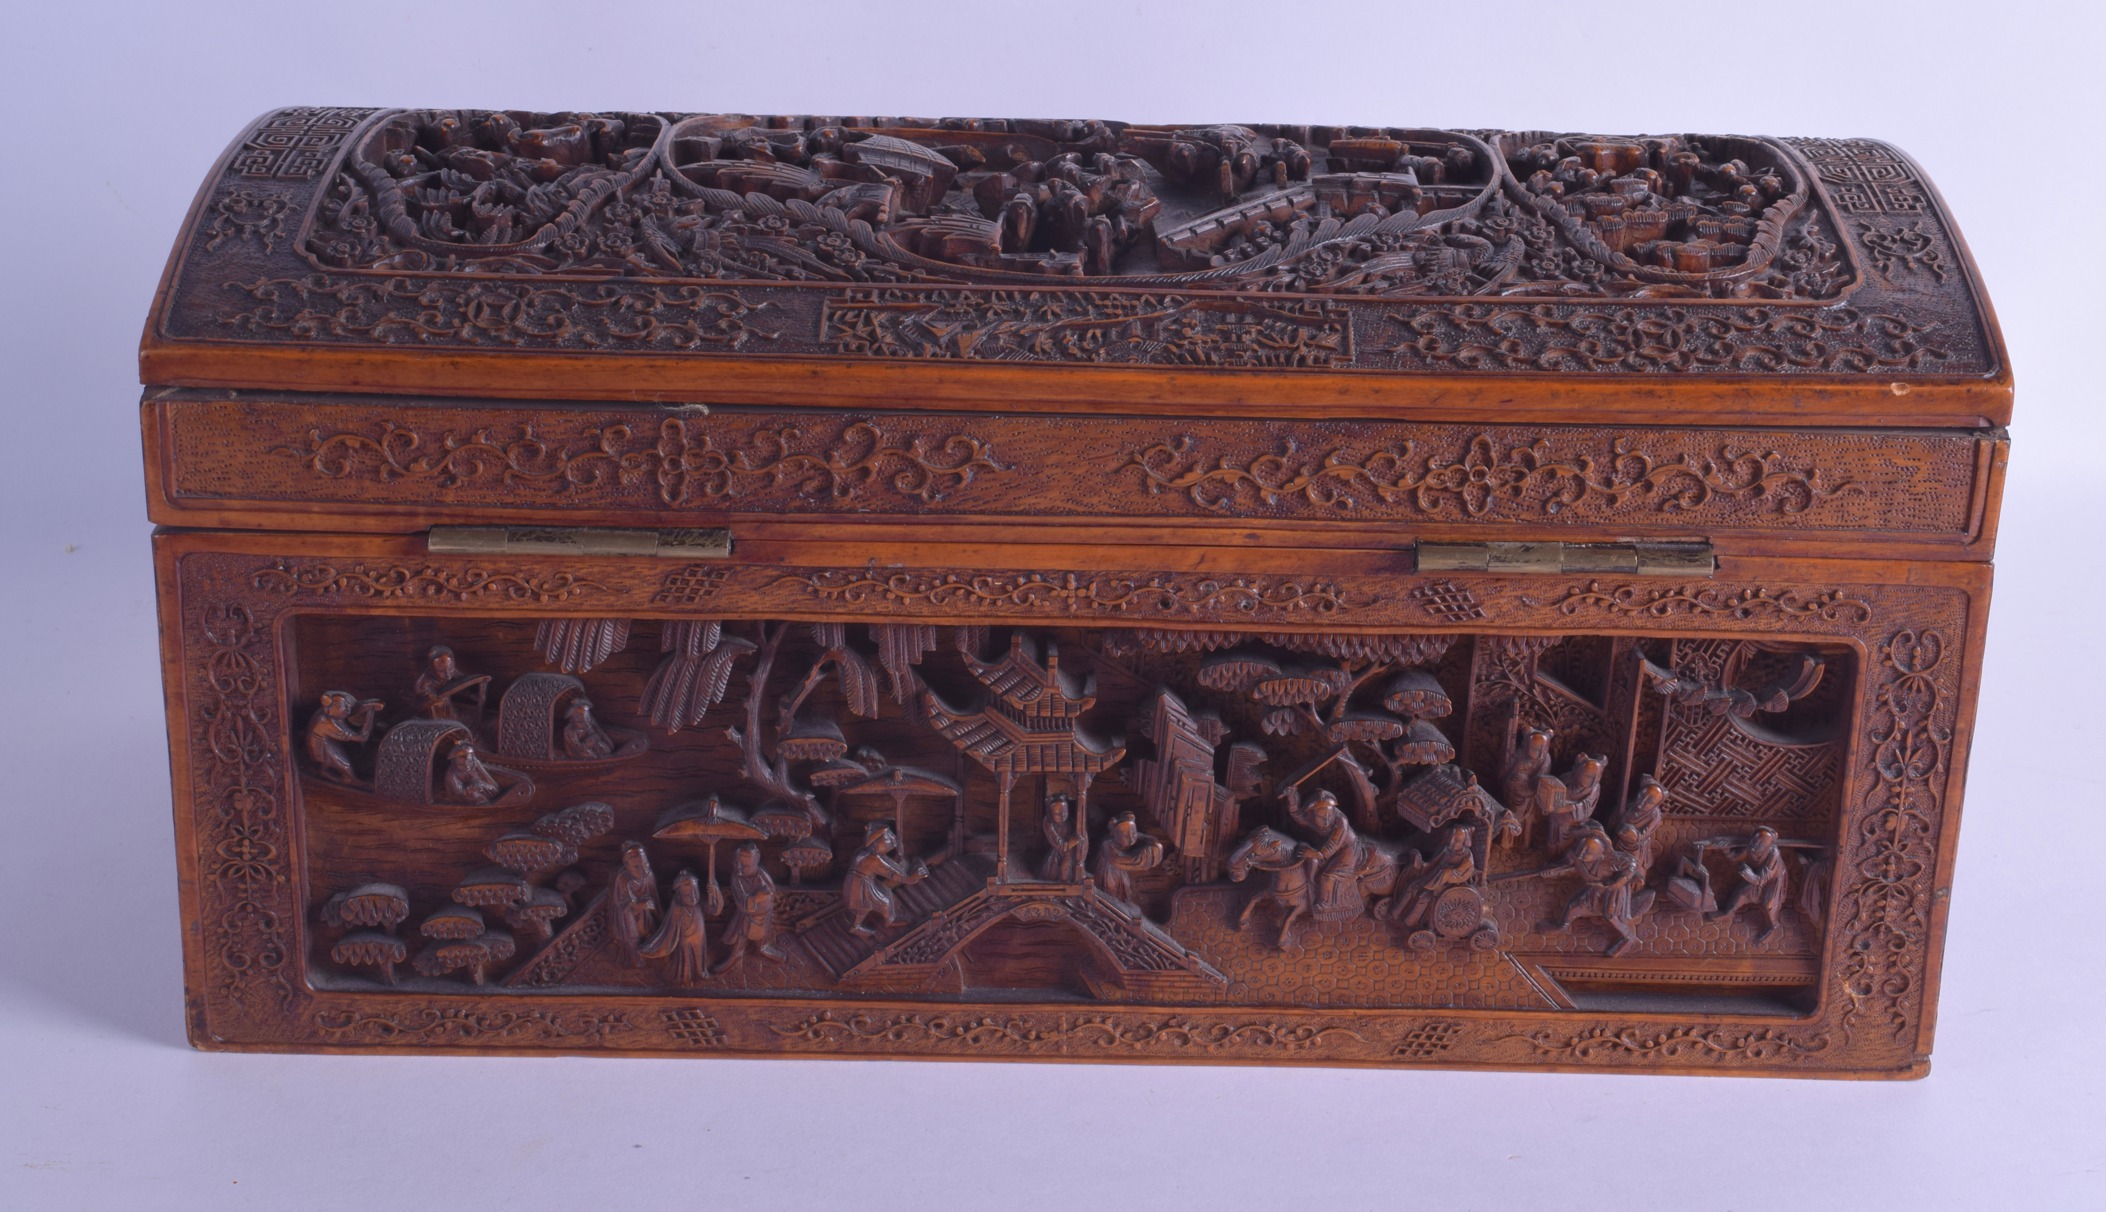 AN IMPORTANT LARGE 18TH/19TH CENTURY CHINESE CARVED SANDALWOOD CASKET AND COVER by Sung Sing Gung, - Bild 3 aus 7